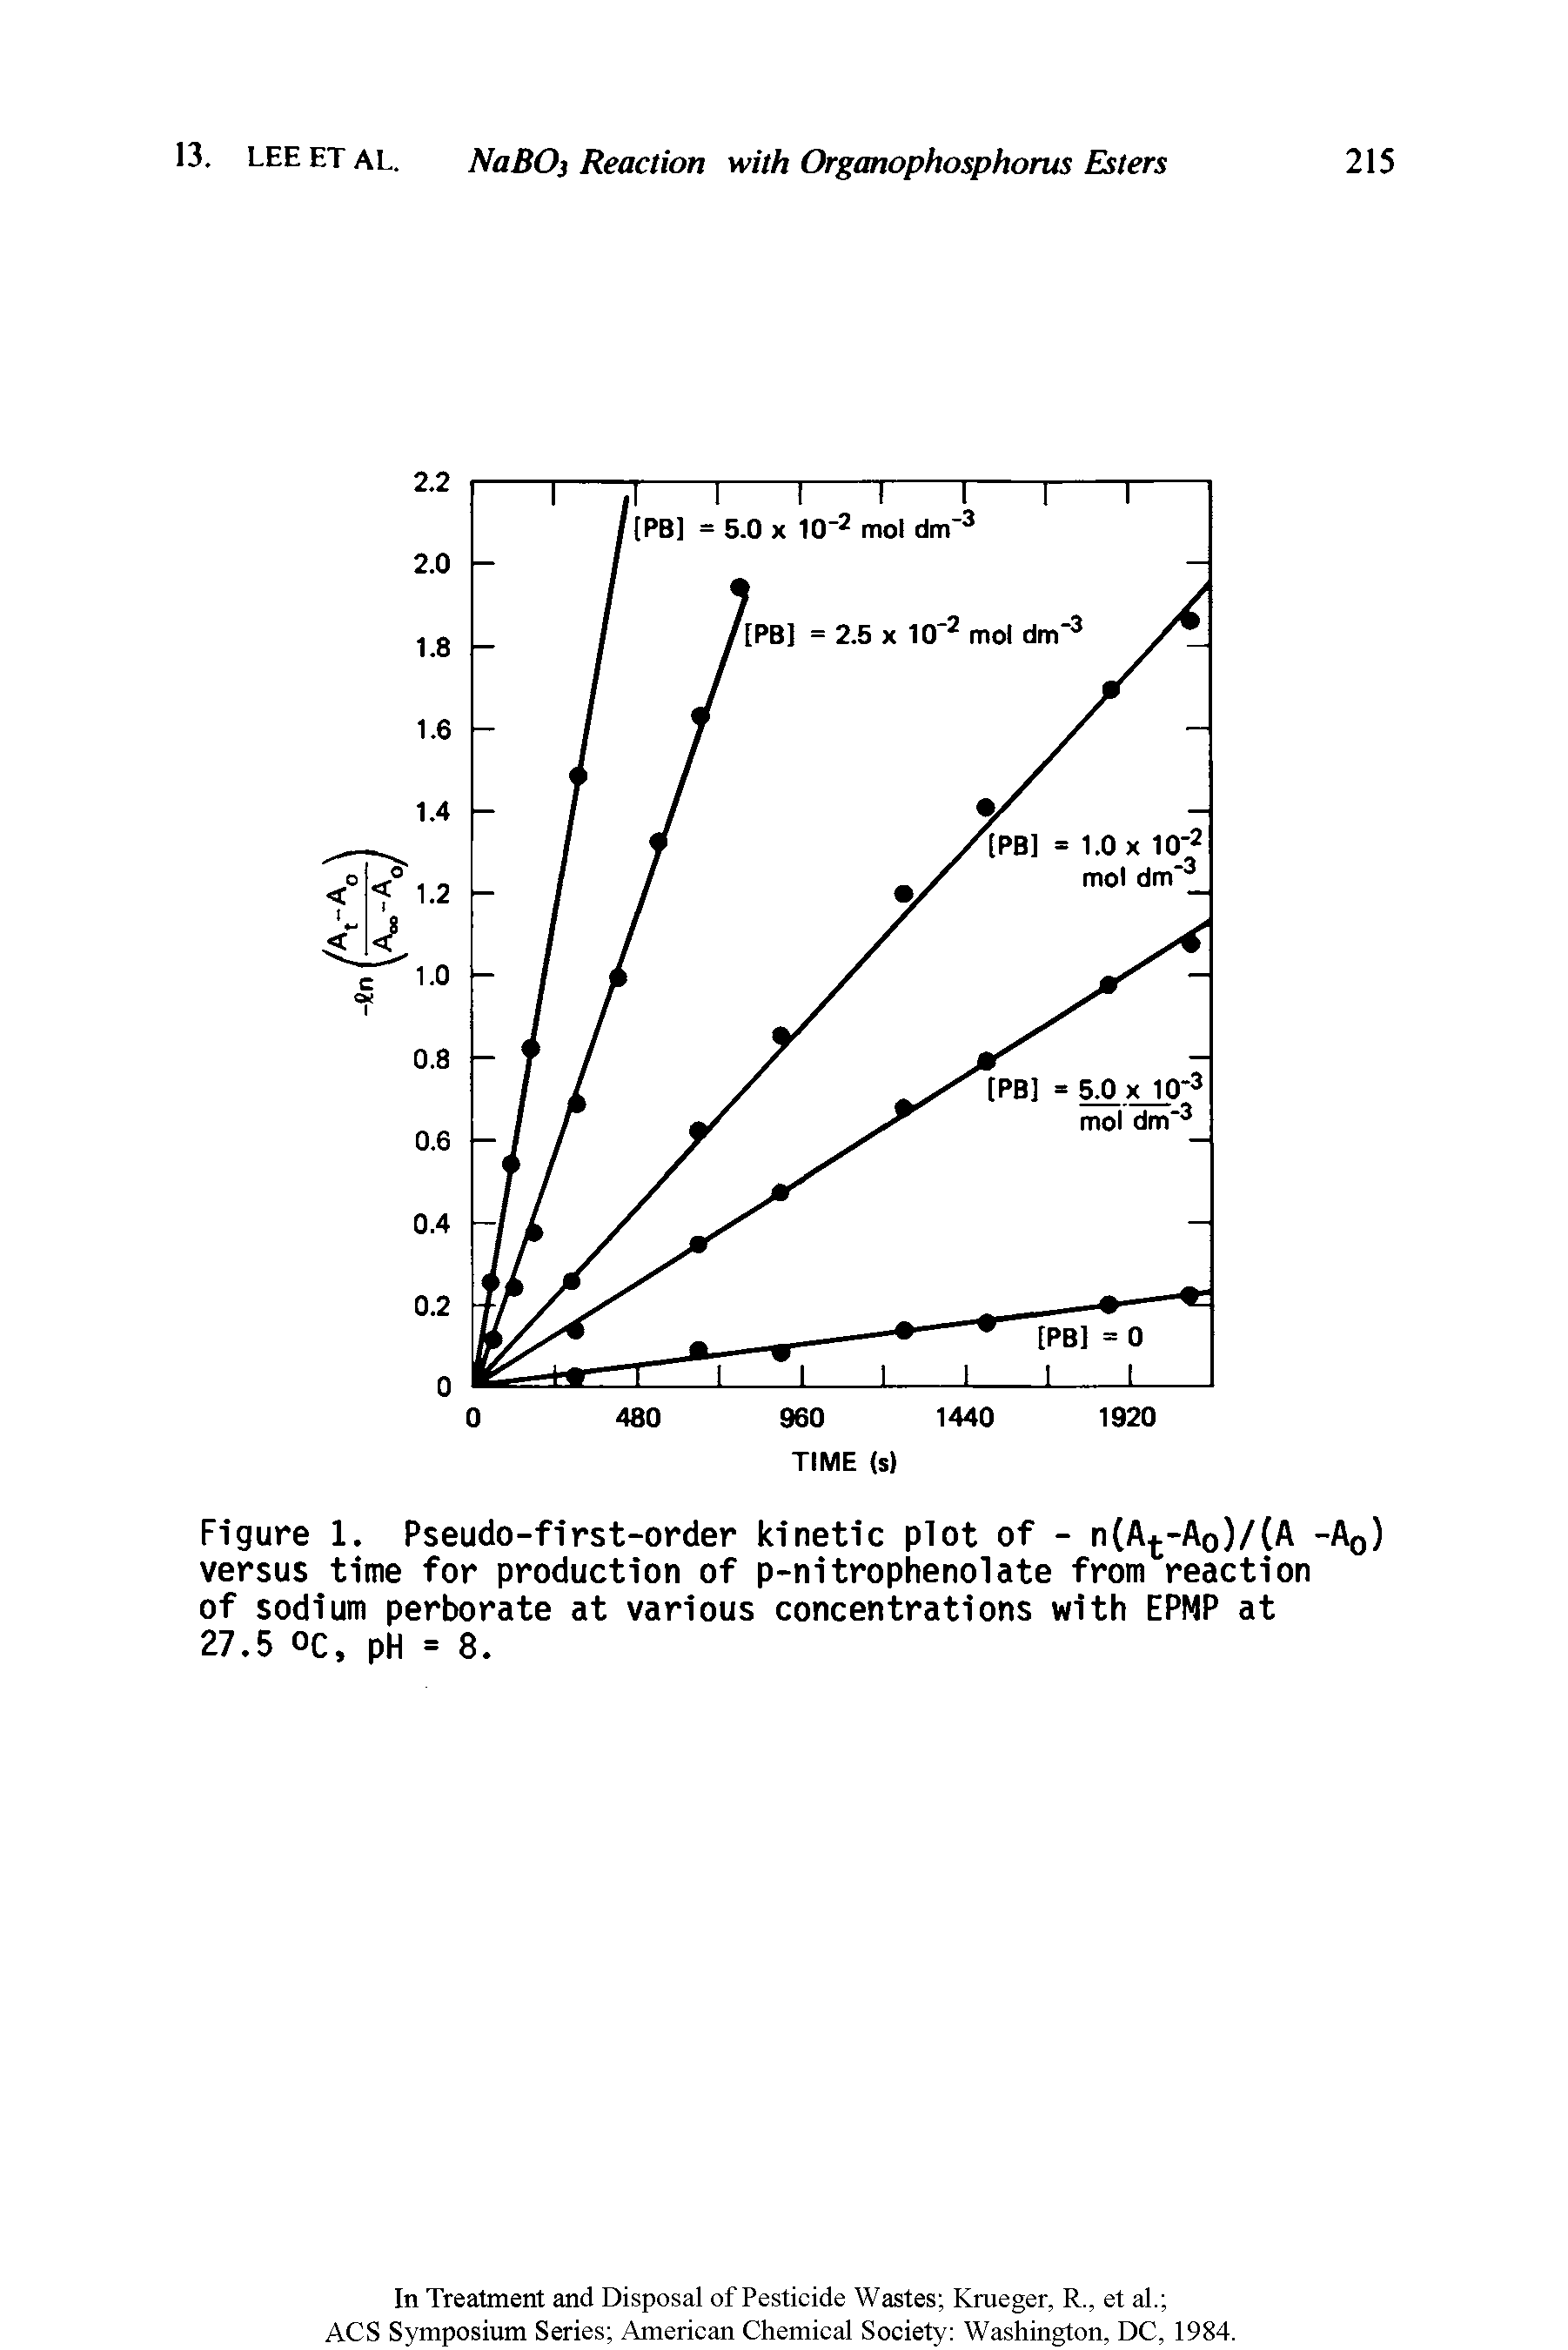 Figure 1. Pseudo-first-order kinetic plot of - n(A -Ao)/ A -Ag) versus time for production of p-nitrophenolate from reaction of sodium perborate at various concentrations with EPMP at 27.5 oc, pH = 8.